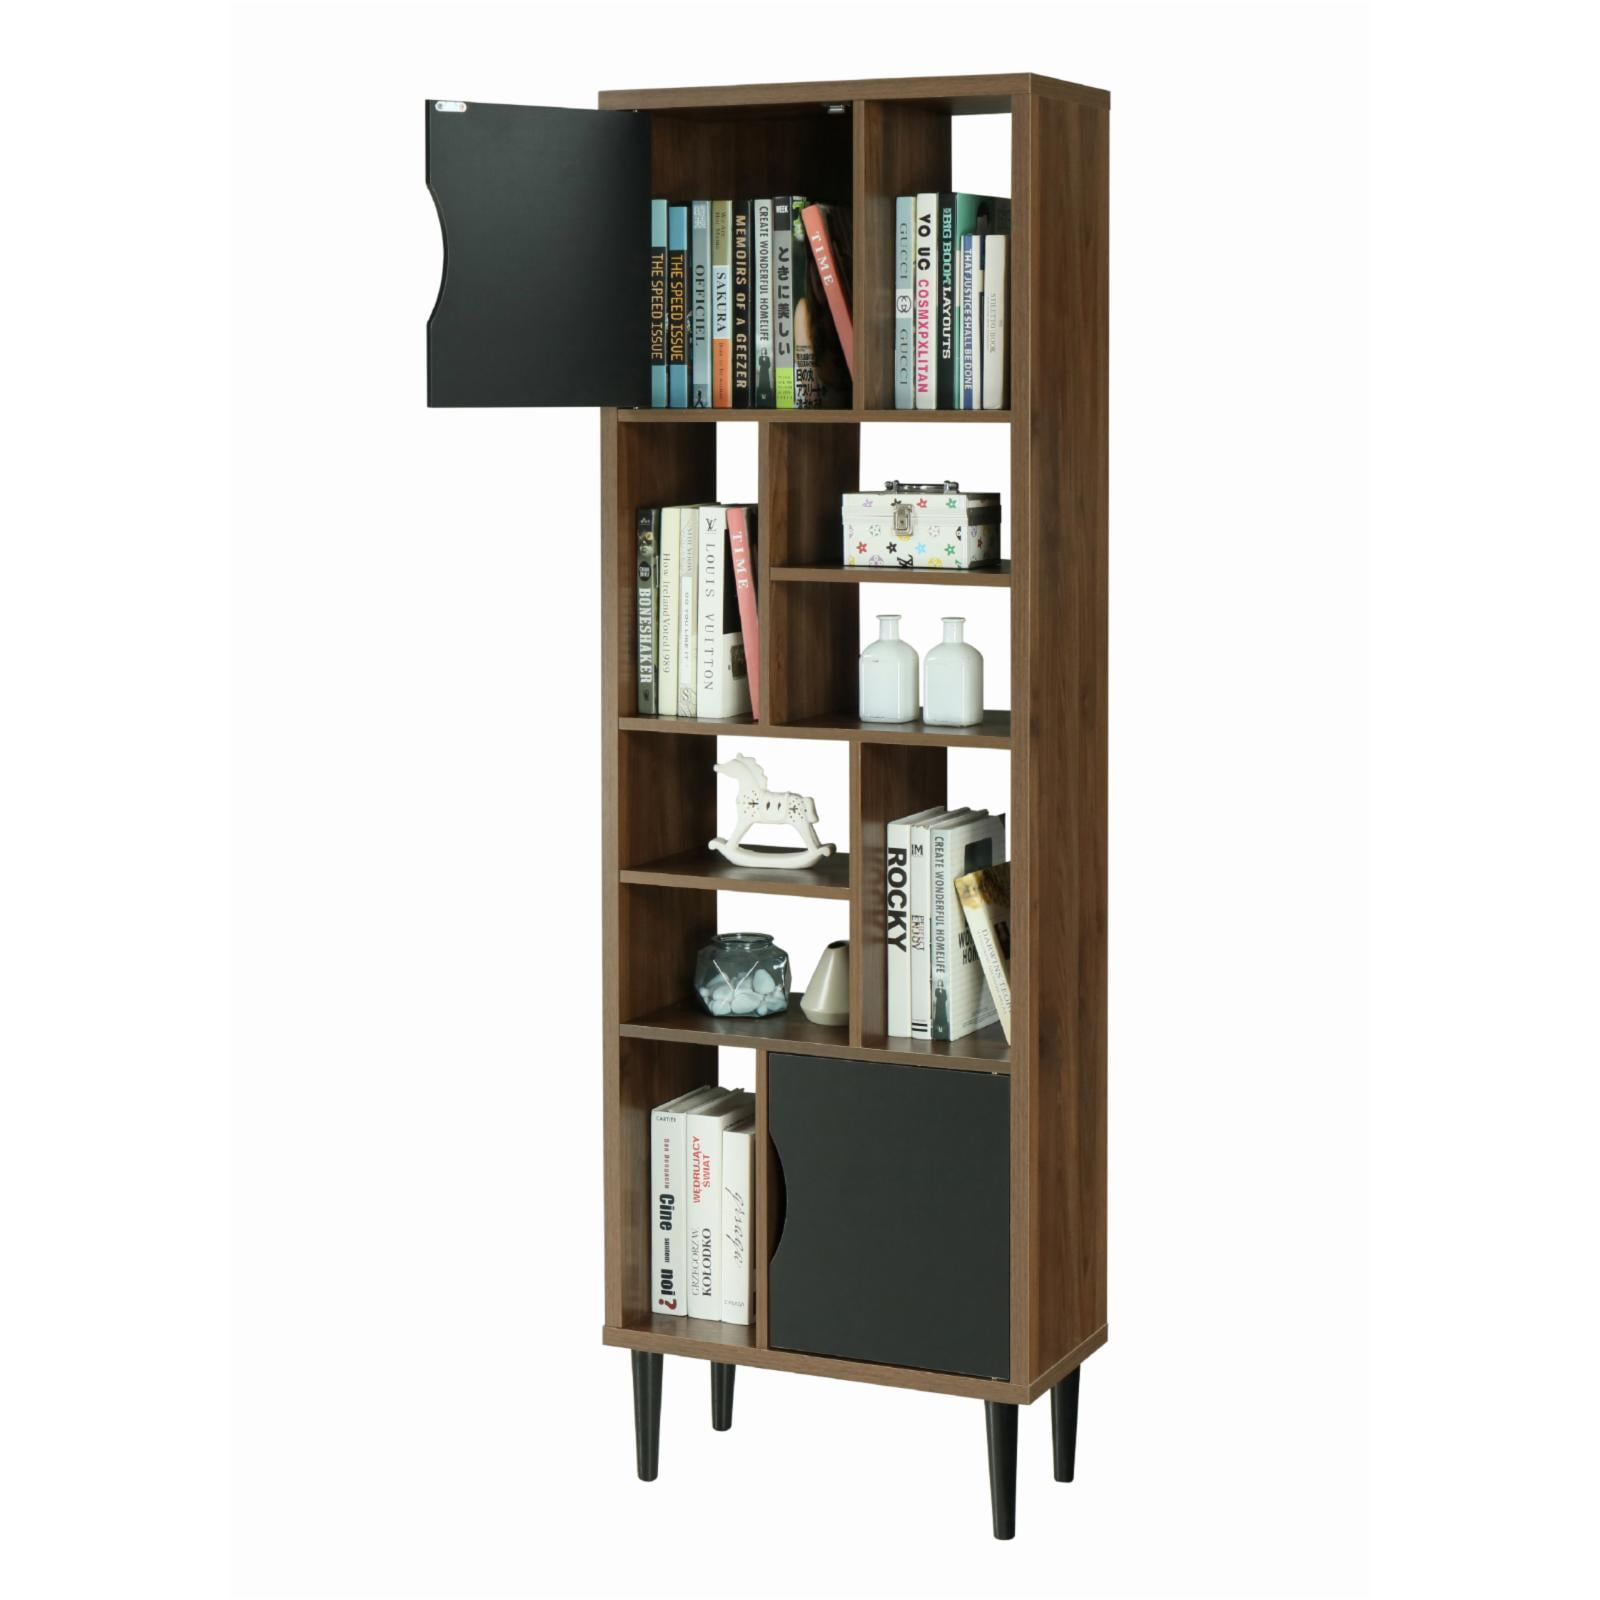 Picture of American Furniture Classics 41302 70.5 x 23.5 x 11.25 in. OS Home & Office Mid Century Modern Accent Bookcase with Two Doors & 10 Storage Areas on Wood Legs